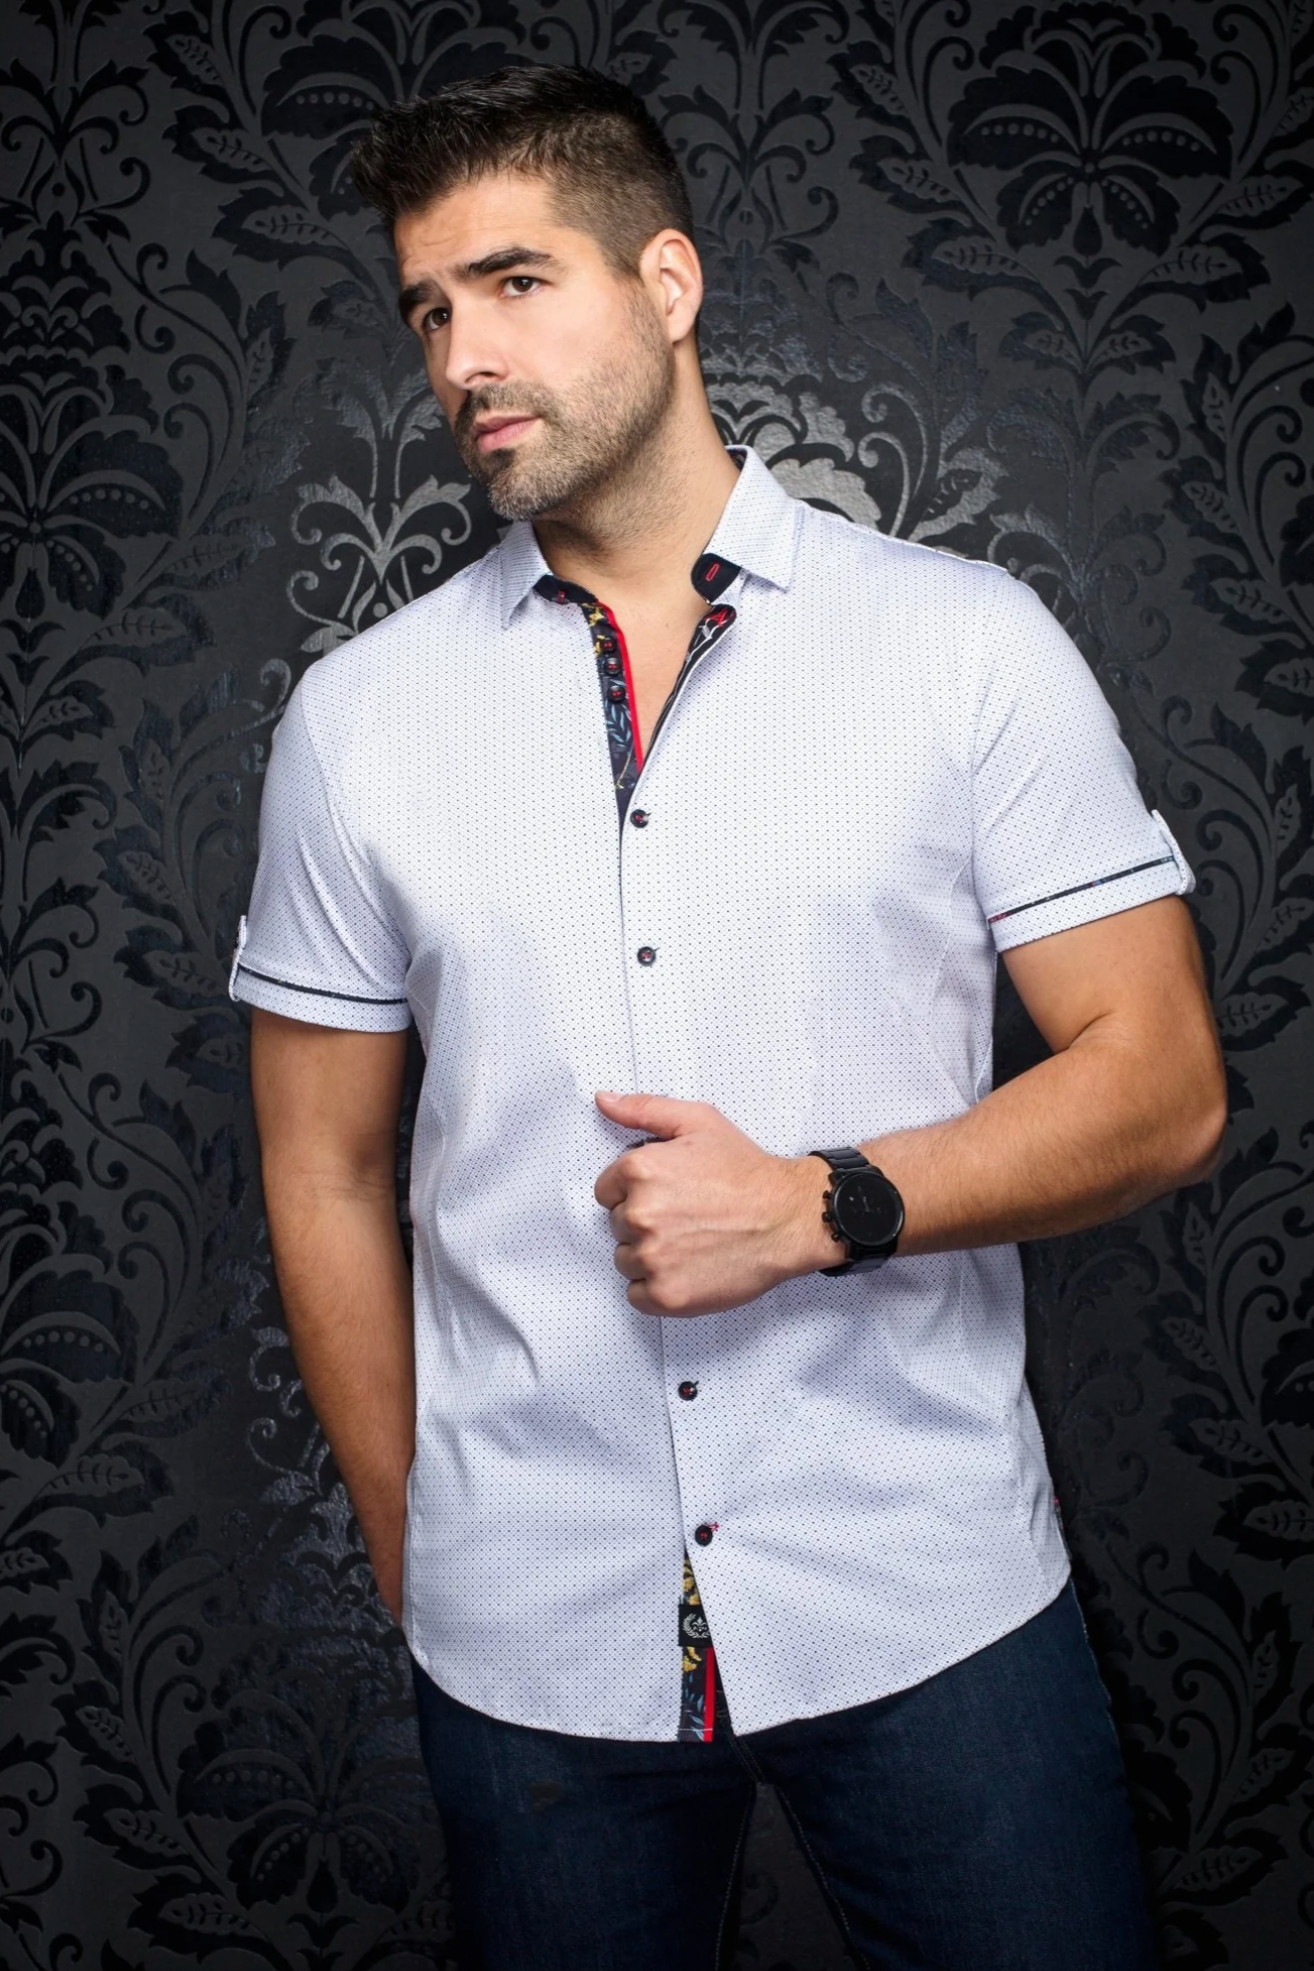 This is a collection of comfortable, performance stretch, fashionable dressy and casual shirts. Stand out from the crowd, thanks to Au Noirs cleaver use of contrasting patterns and sophisticated details. Comfortable with a high quality, performance stretch cotton fabric.